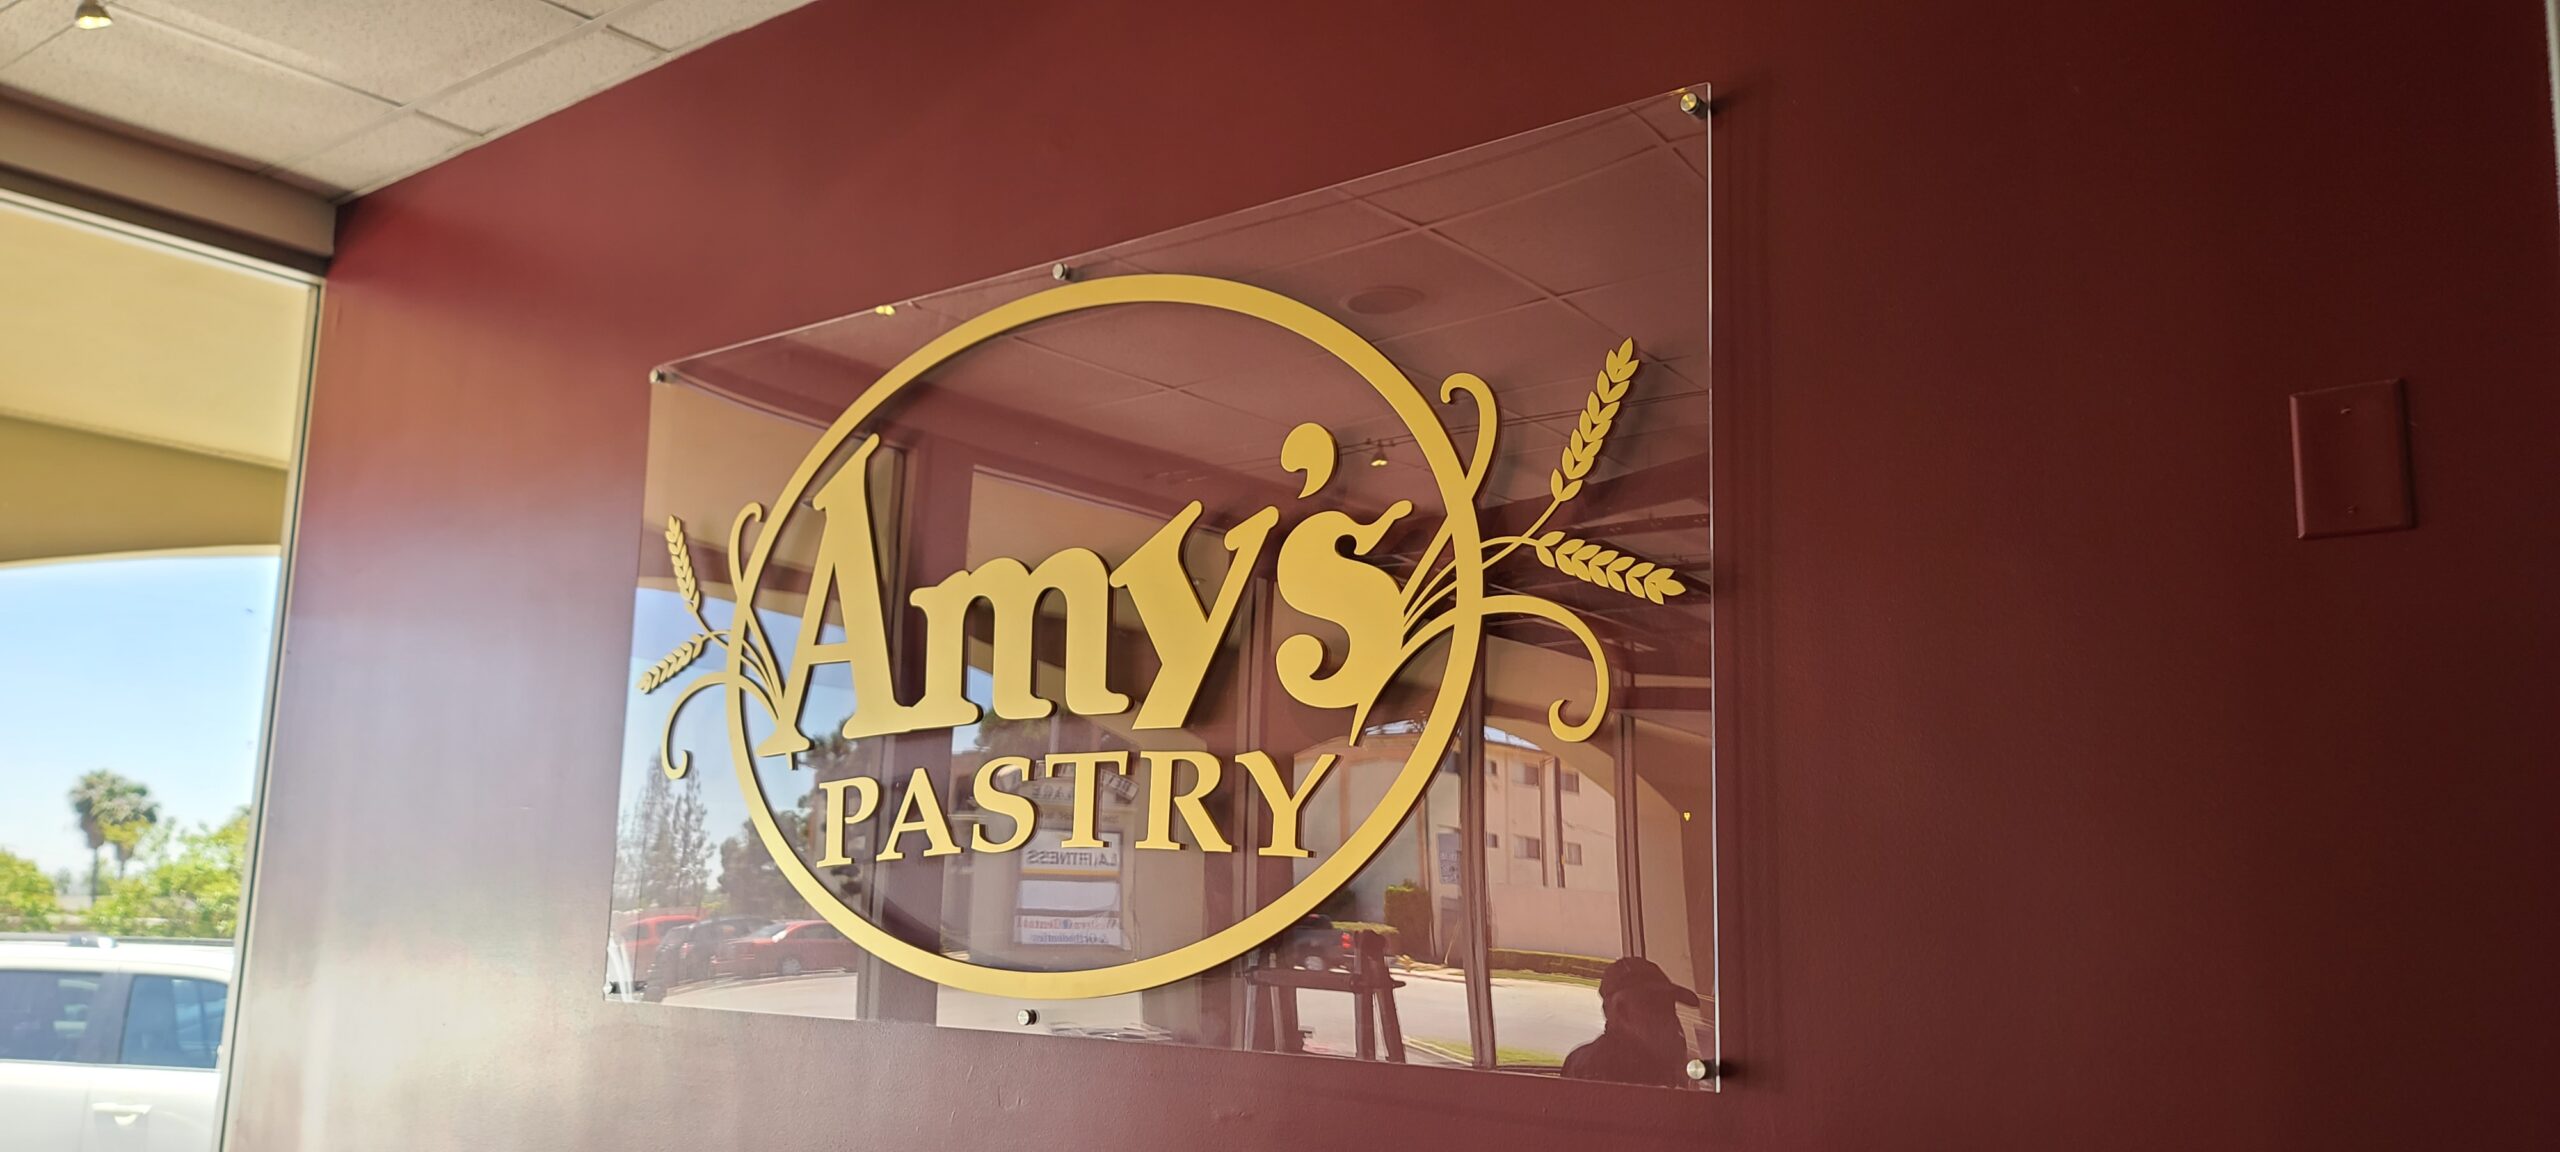 You are currently viewing Bakeshop Panel Sign for Amy’s Pastry in Montebello